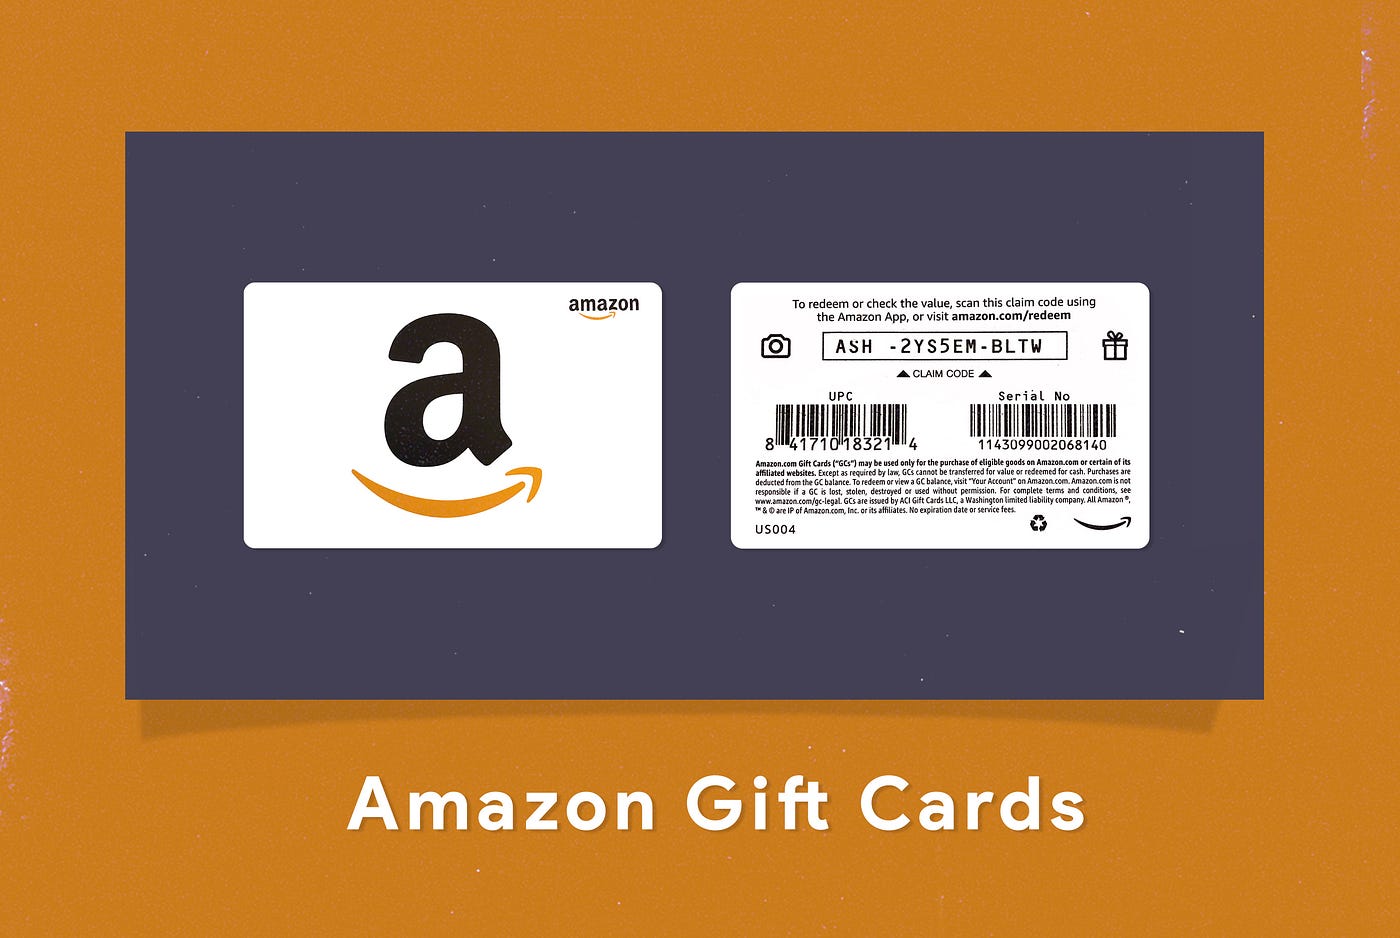 How to Redeem an Amazon Gift Card Using a QR Code?